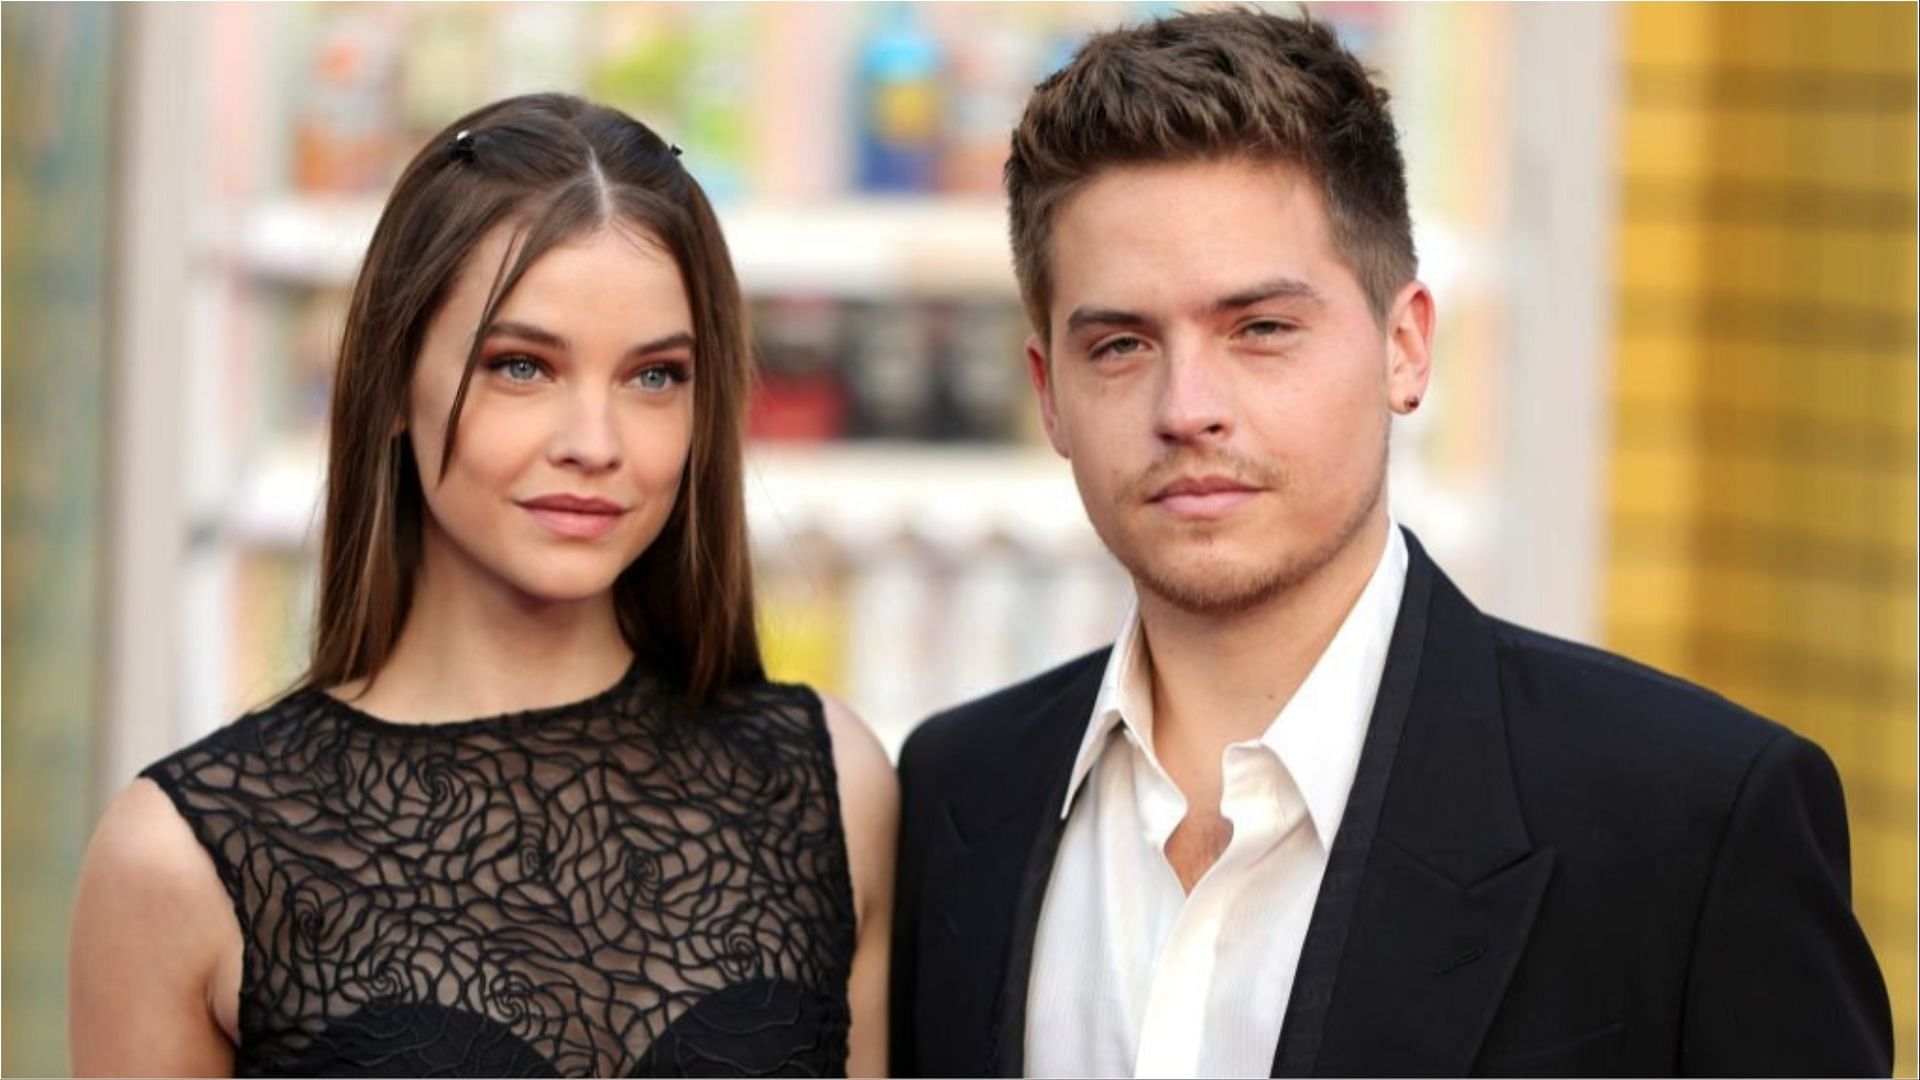 Dylan Sprouse and Barbara Palvin are engaged now (Image via Matt Winkelmeyer/Getty Images)